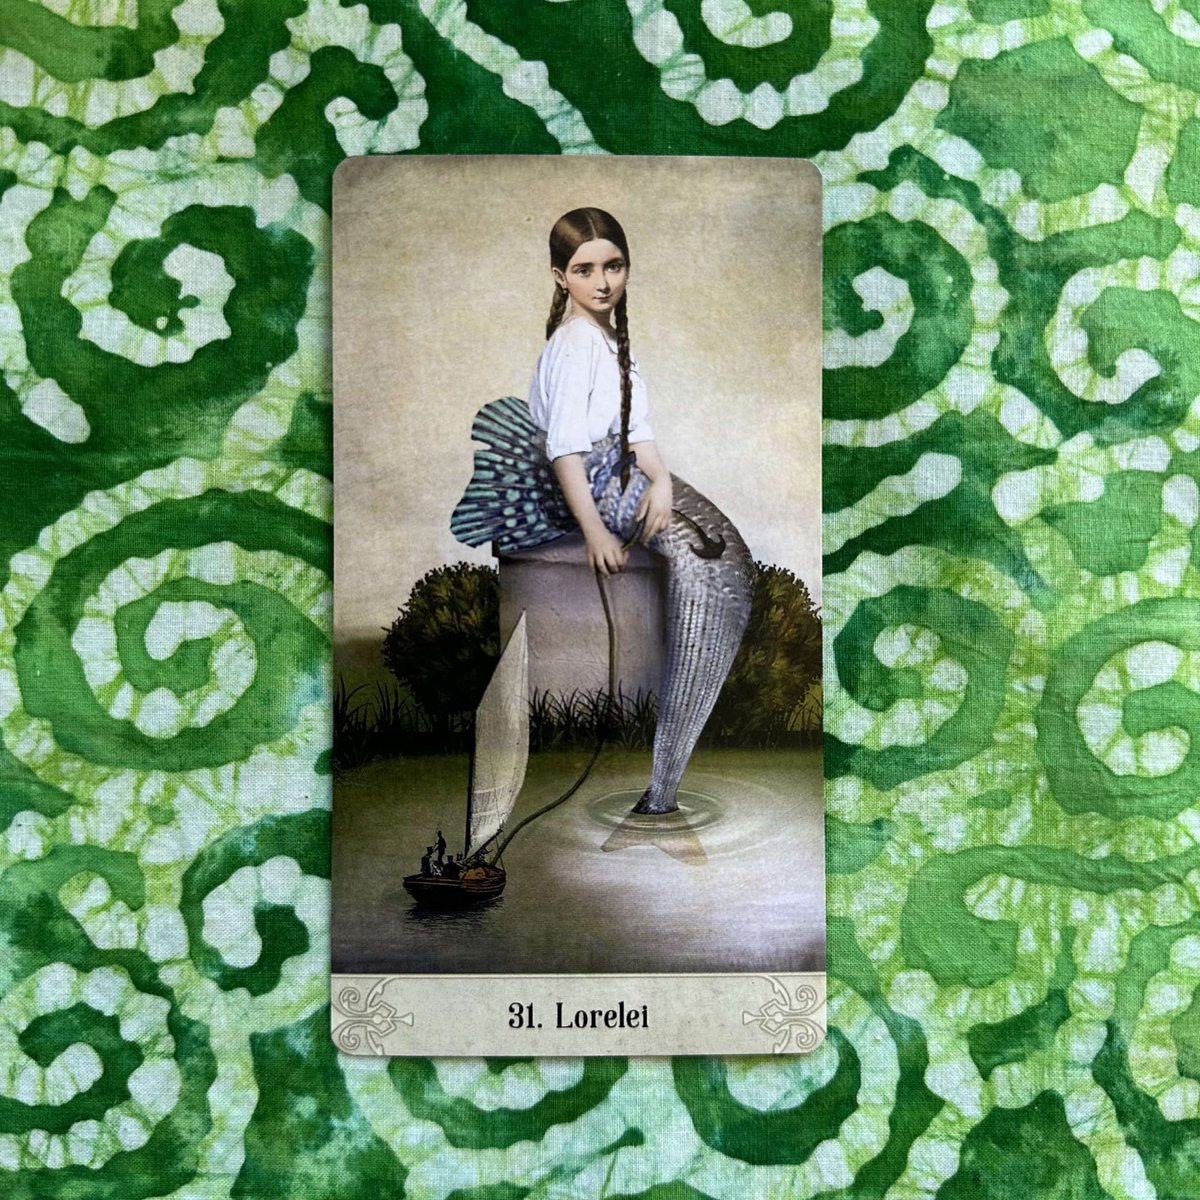 Card of the Day: Lorelei
Don't go with the flow today. Be in control of your destiny. Take hold of the steering wheel firmly and head toward your desired destination. Just do it!
#tarotbygraham #tarot #oraclereading #oracleofmysticalmoments #cardoftheday #oraclecards